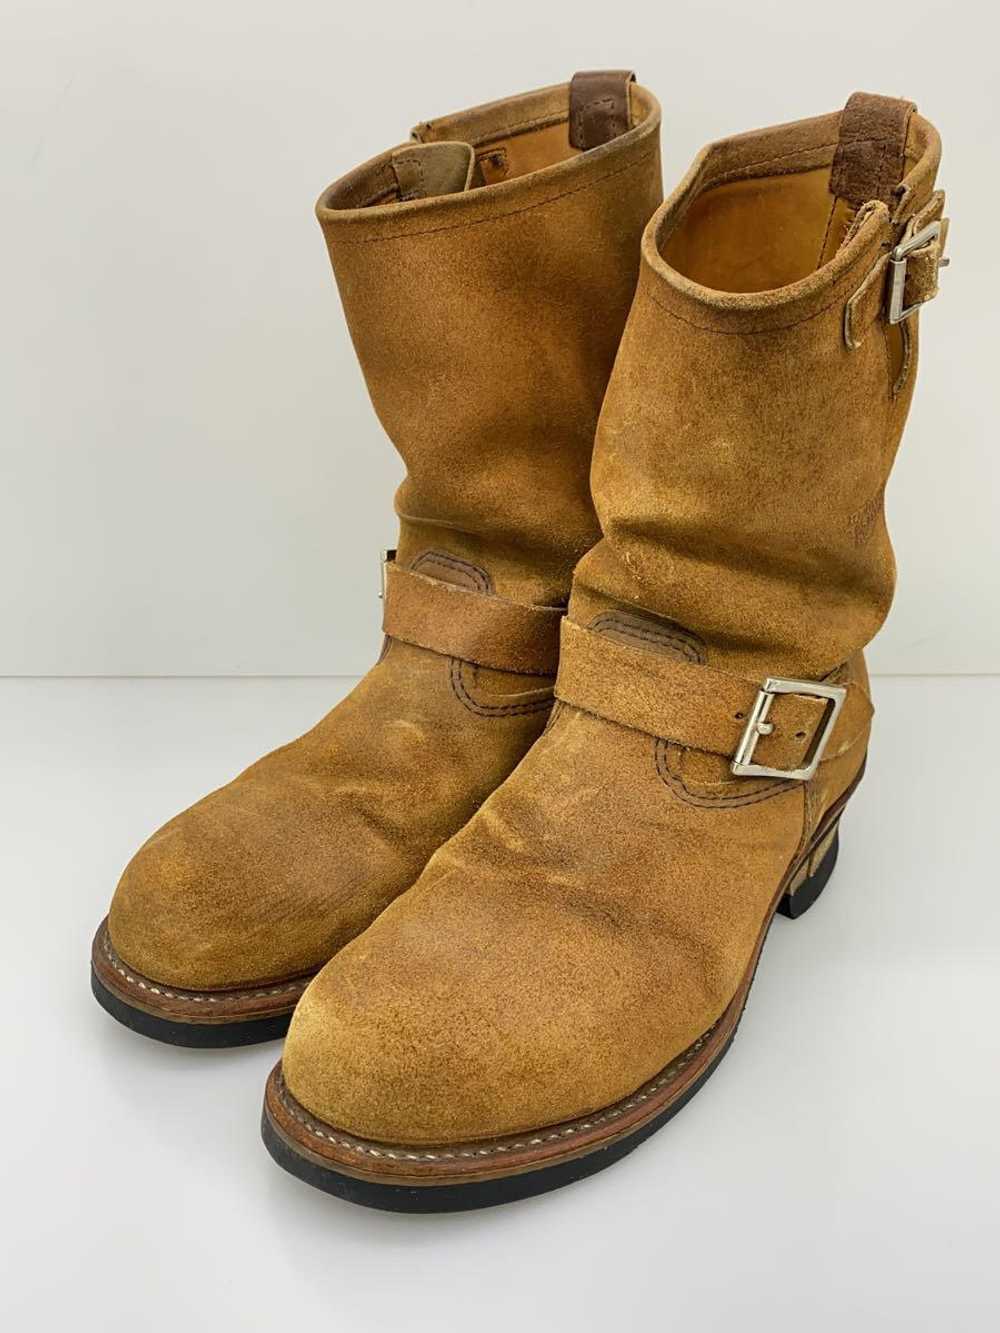 Red Wing Engineer Boots Us9 Cml Suede 8178 Shoes - image 2